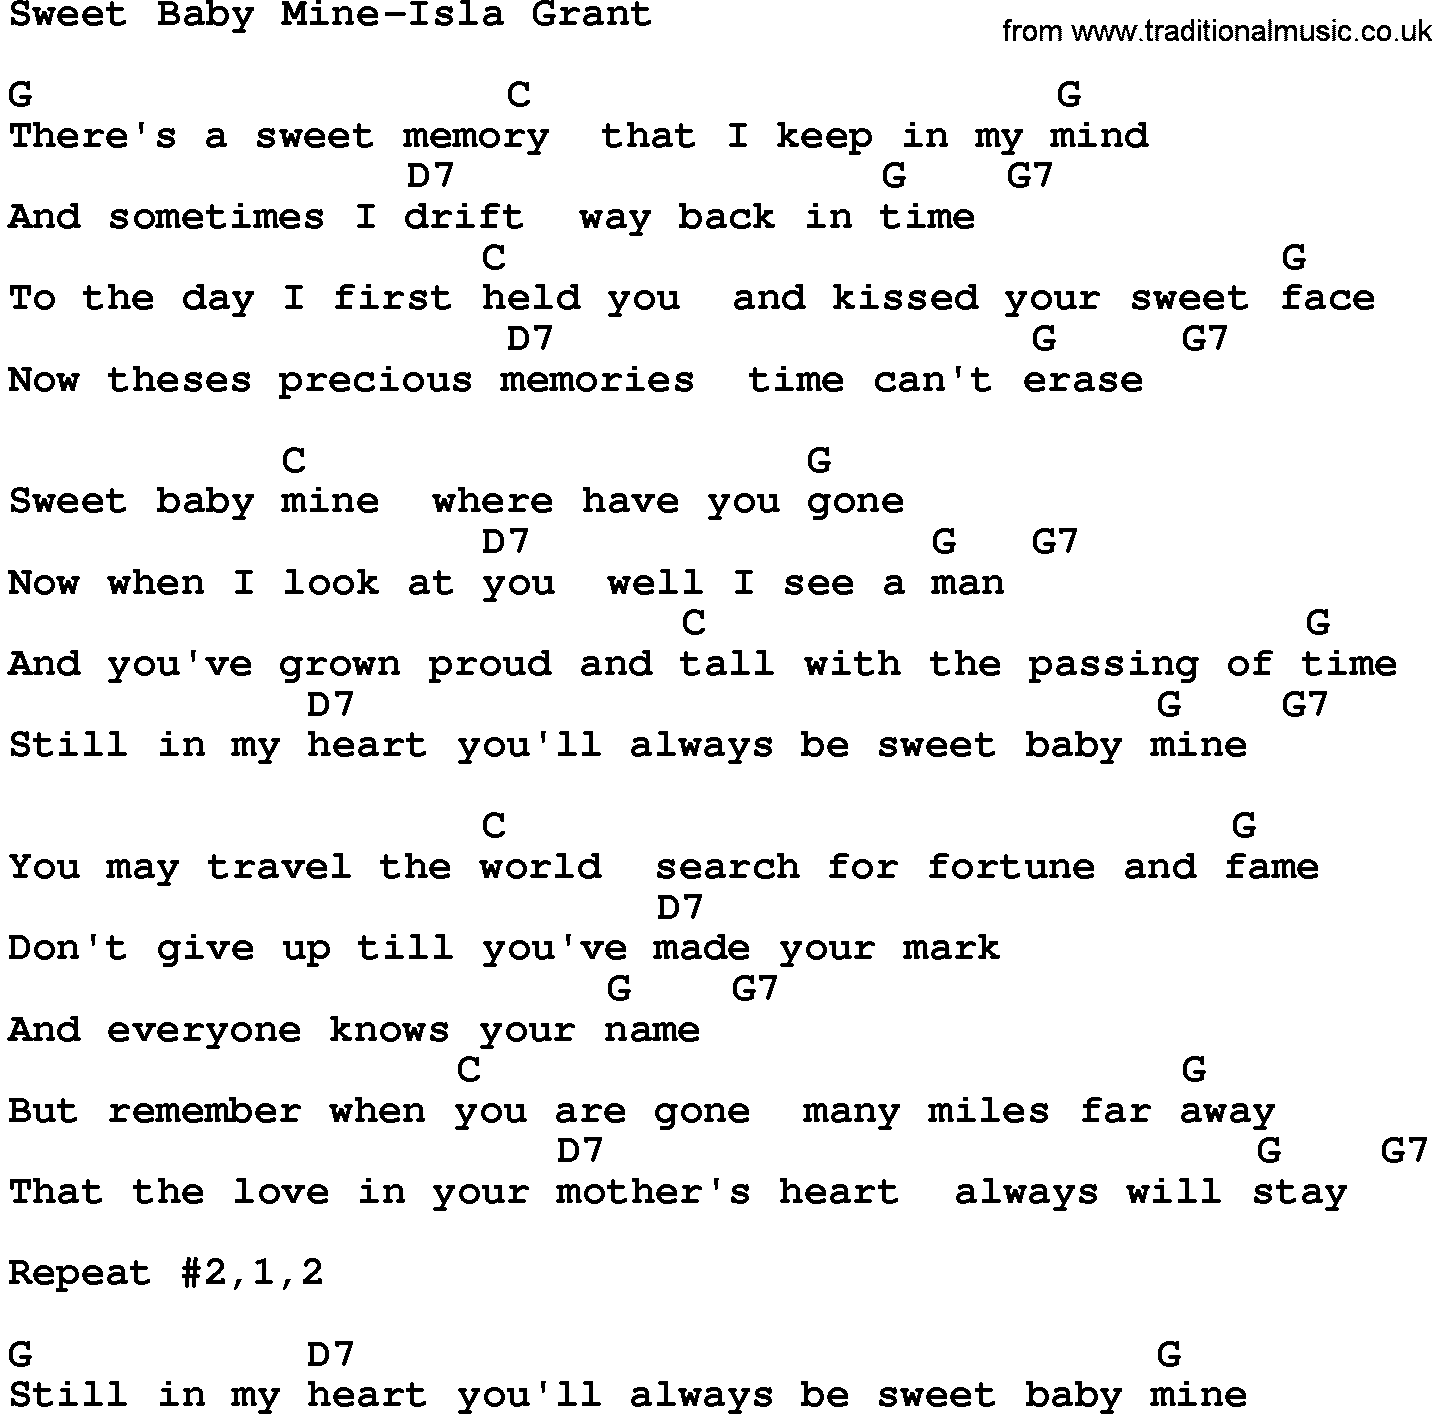 Country music song: Sweet Baby Mine-Isla Grant lyrics and chords